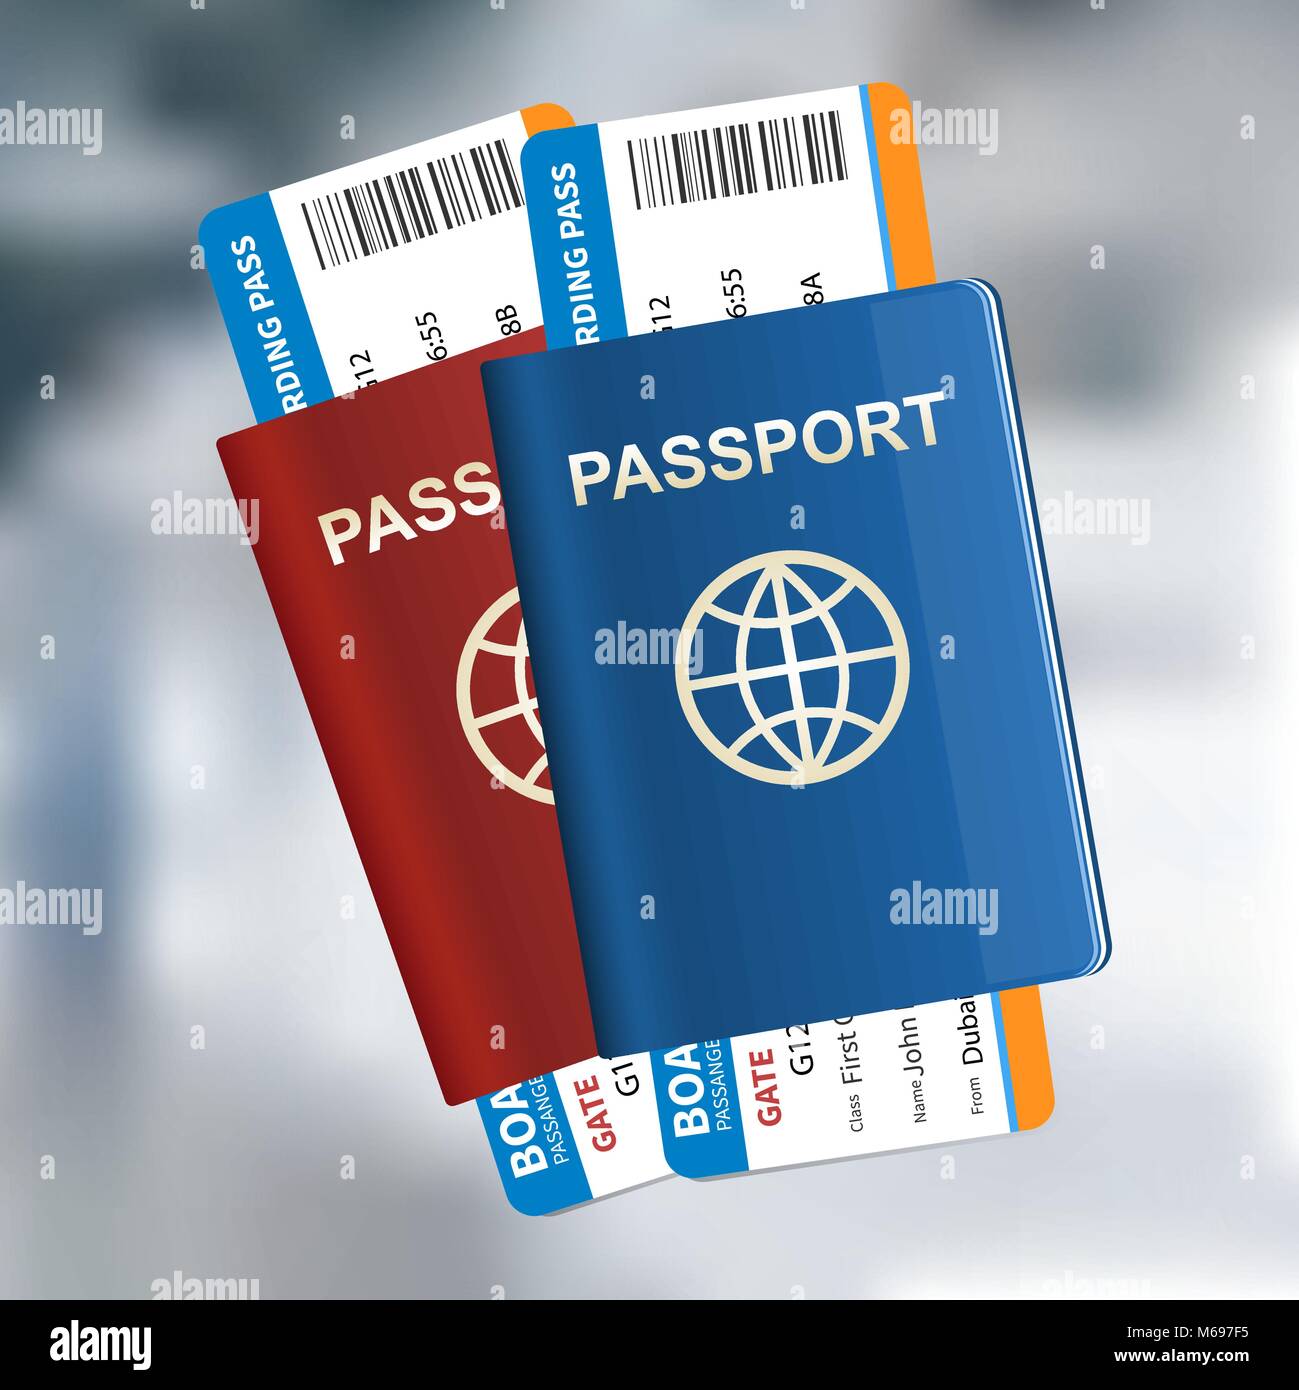 Two International passports with tickets on the airport background. Air travel concept. Vector illustration. Stock Vector